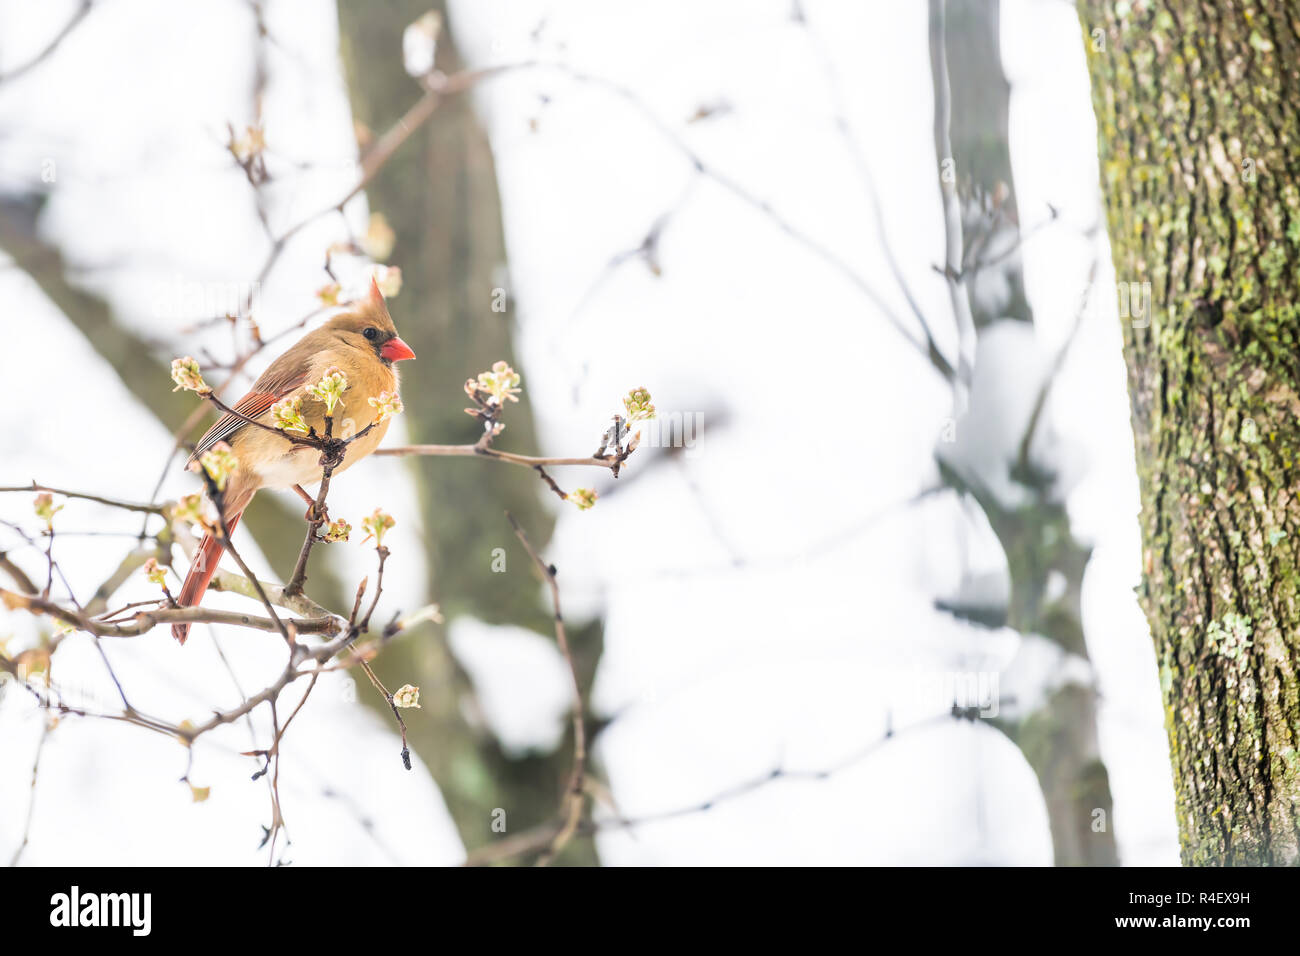 Closeup of fluffed, puffed up orange, red female cardinal bird side, perched on sakura, cherry tree branch, covered in falling cold snow with buds dur Stock Photo